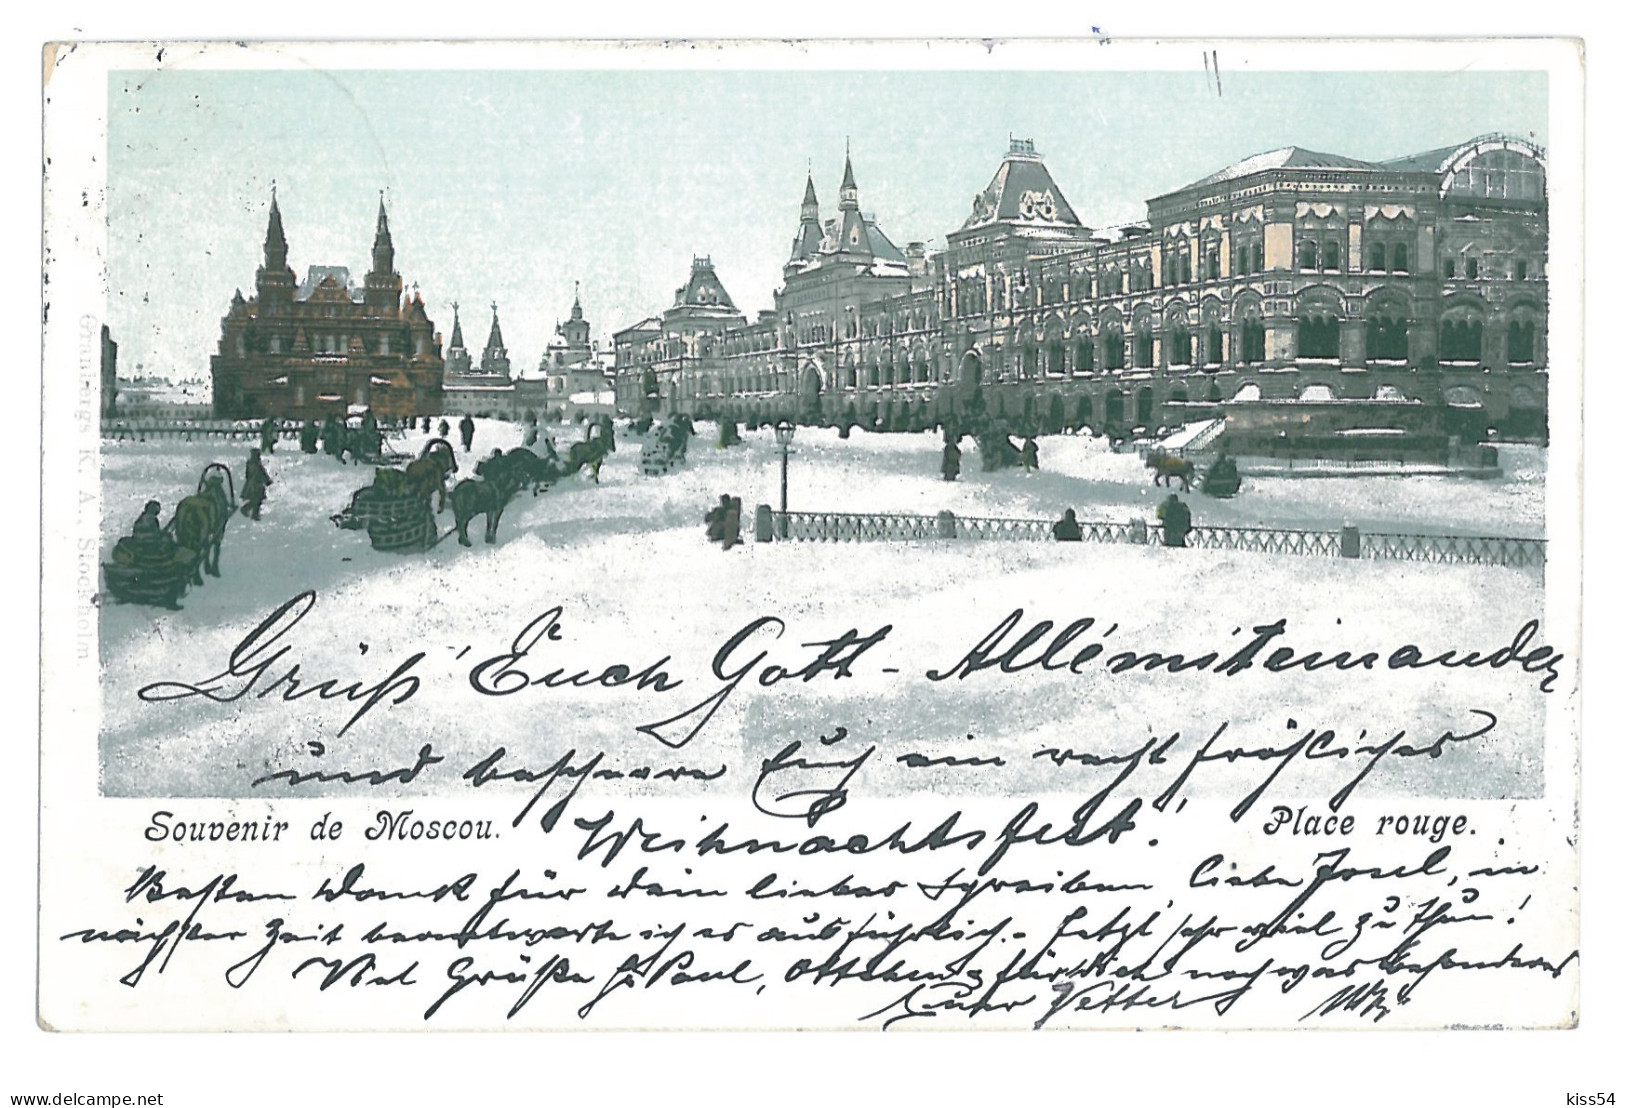 RUS 60 - 13862 MOSCOW, Russia, Litho, Red Market - Old Postcard - Used - 1900 - Russia